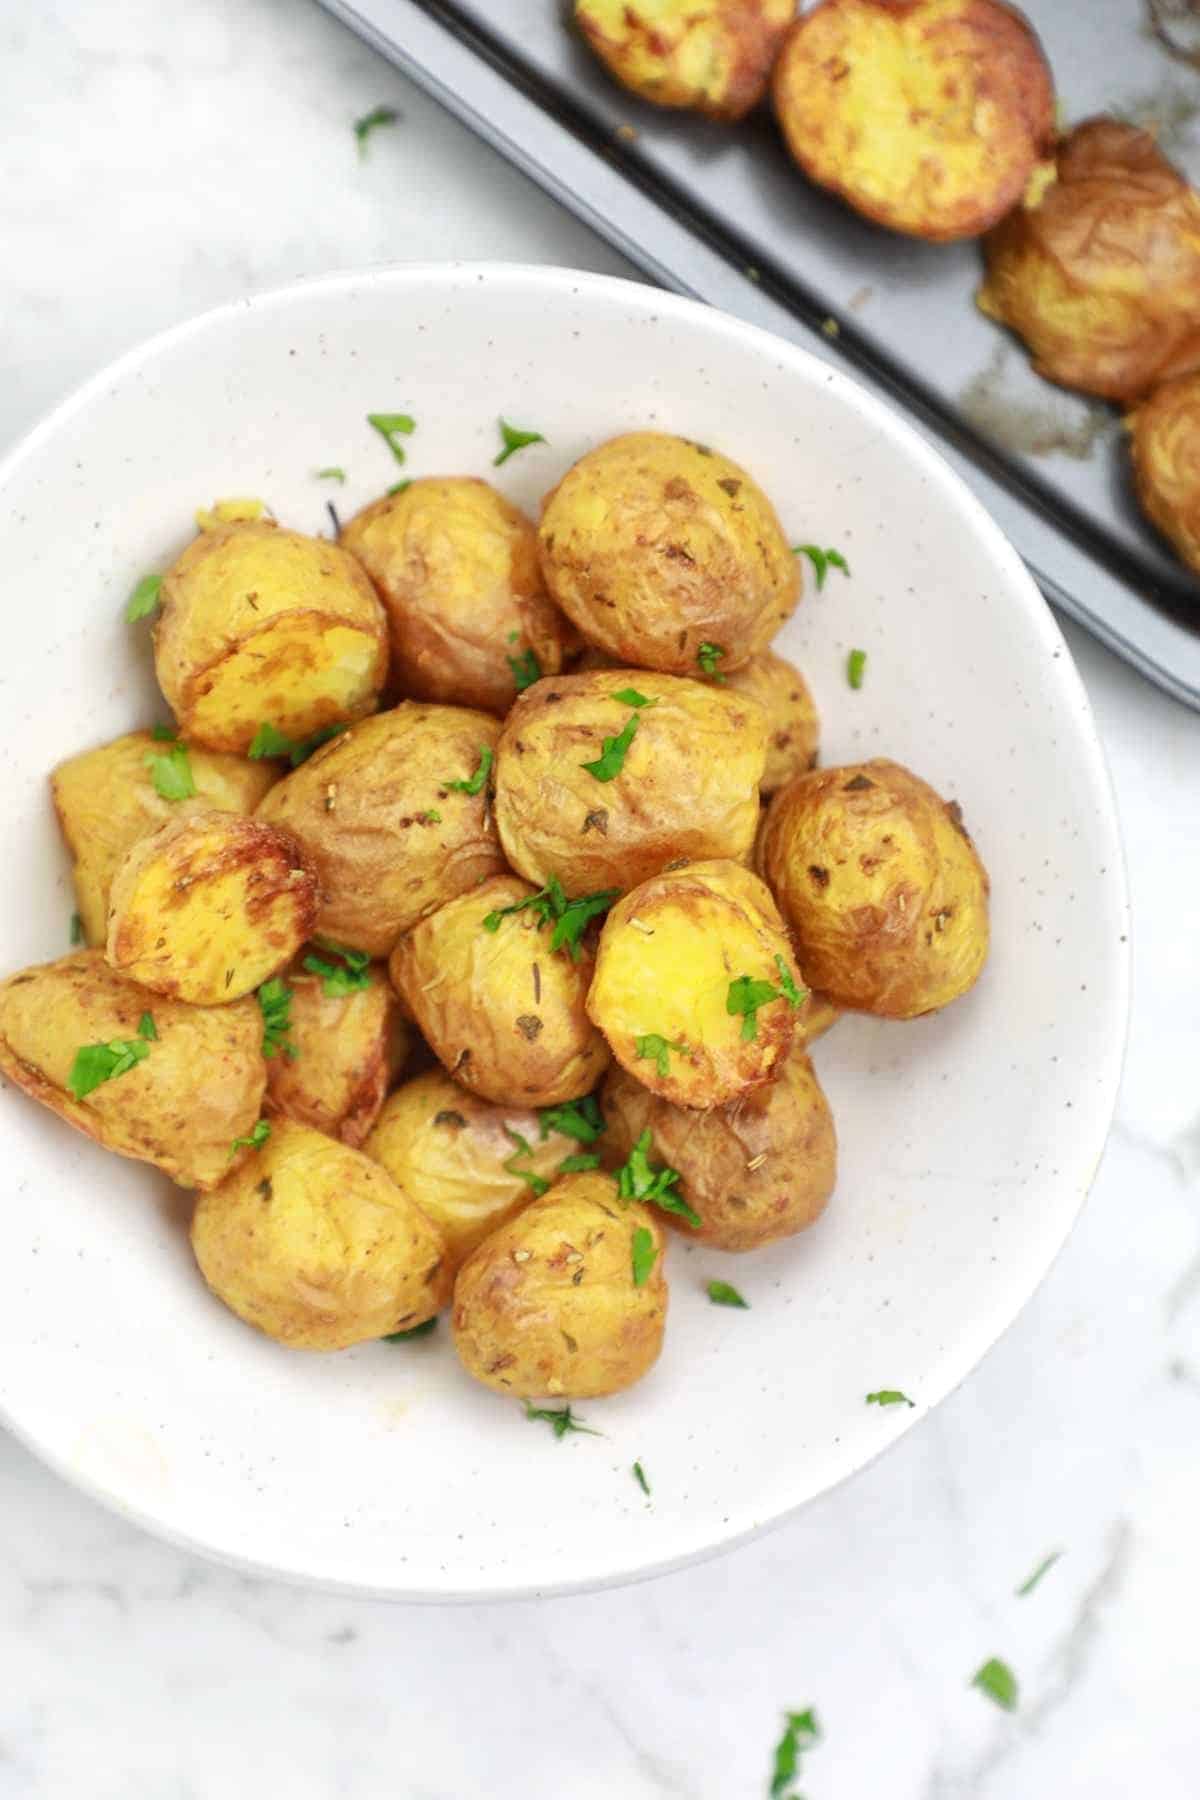 roasted baby potatoes served on a plate.